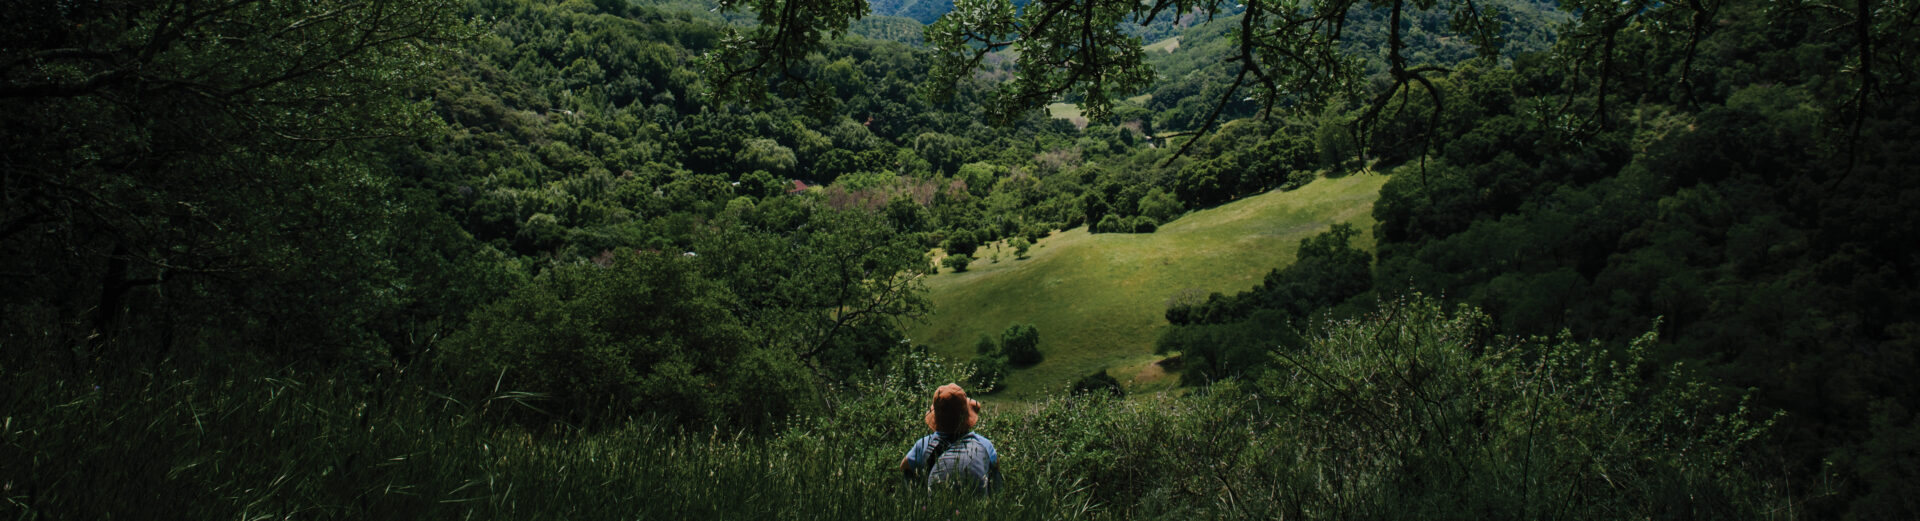 Man looking out at tree-covered hillside